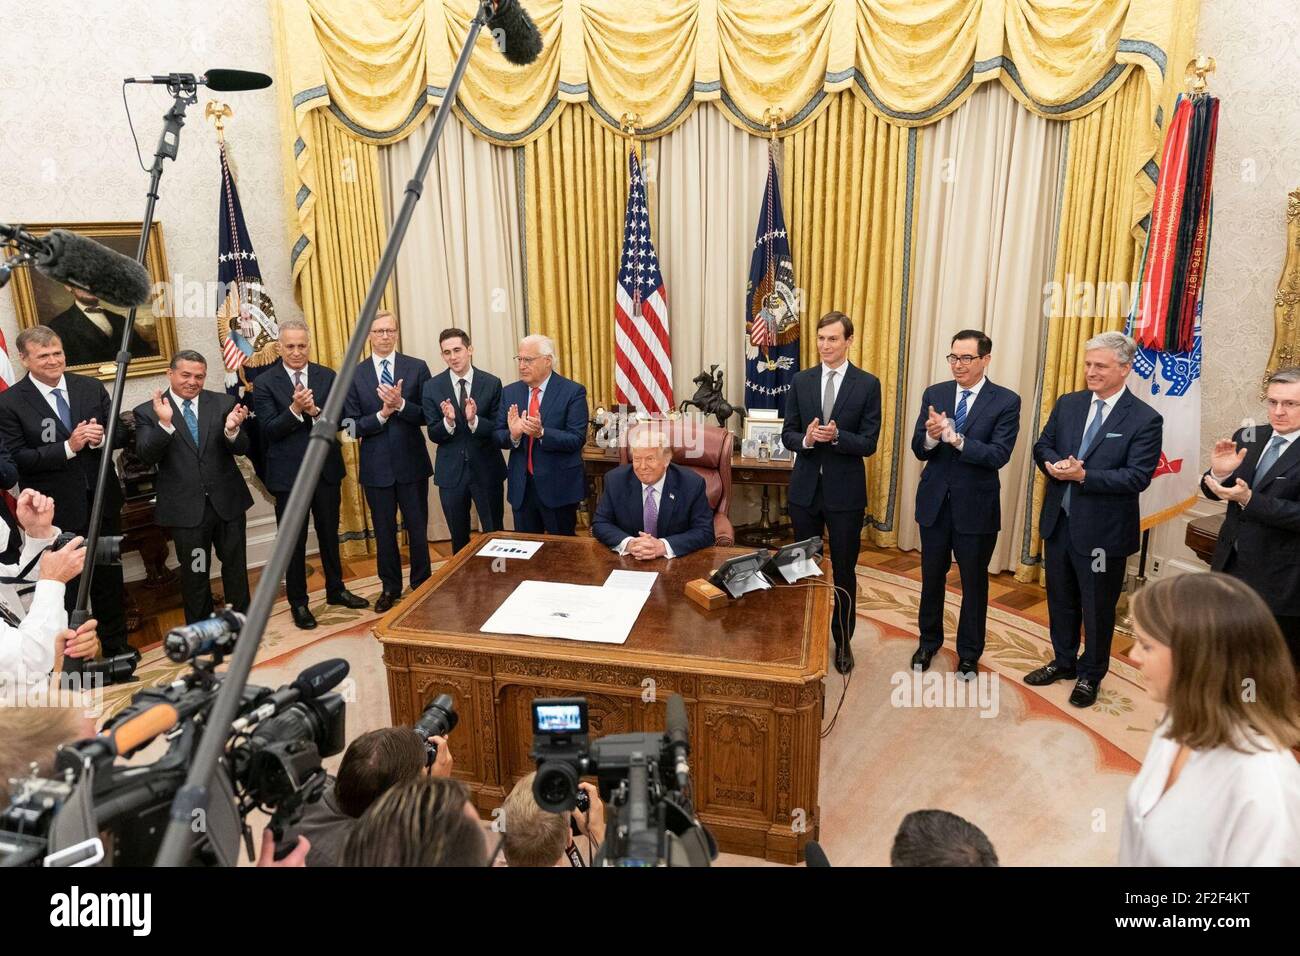 President Trump Delivers a Statement from the Oval Office 04. Stock Photo